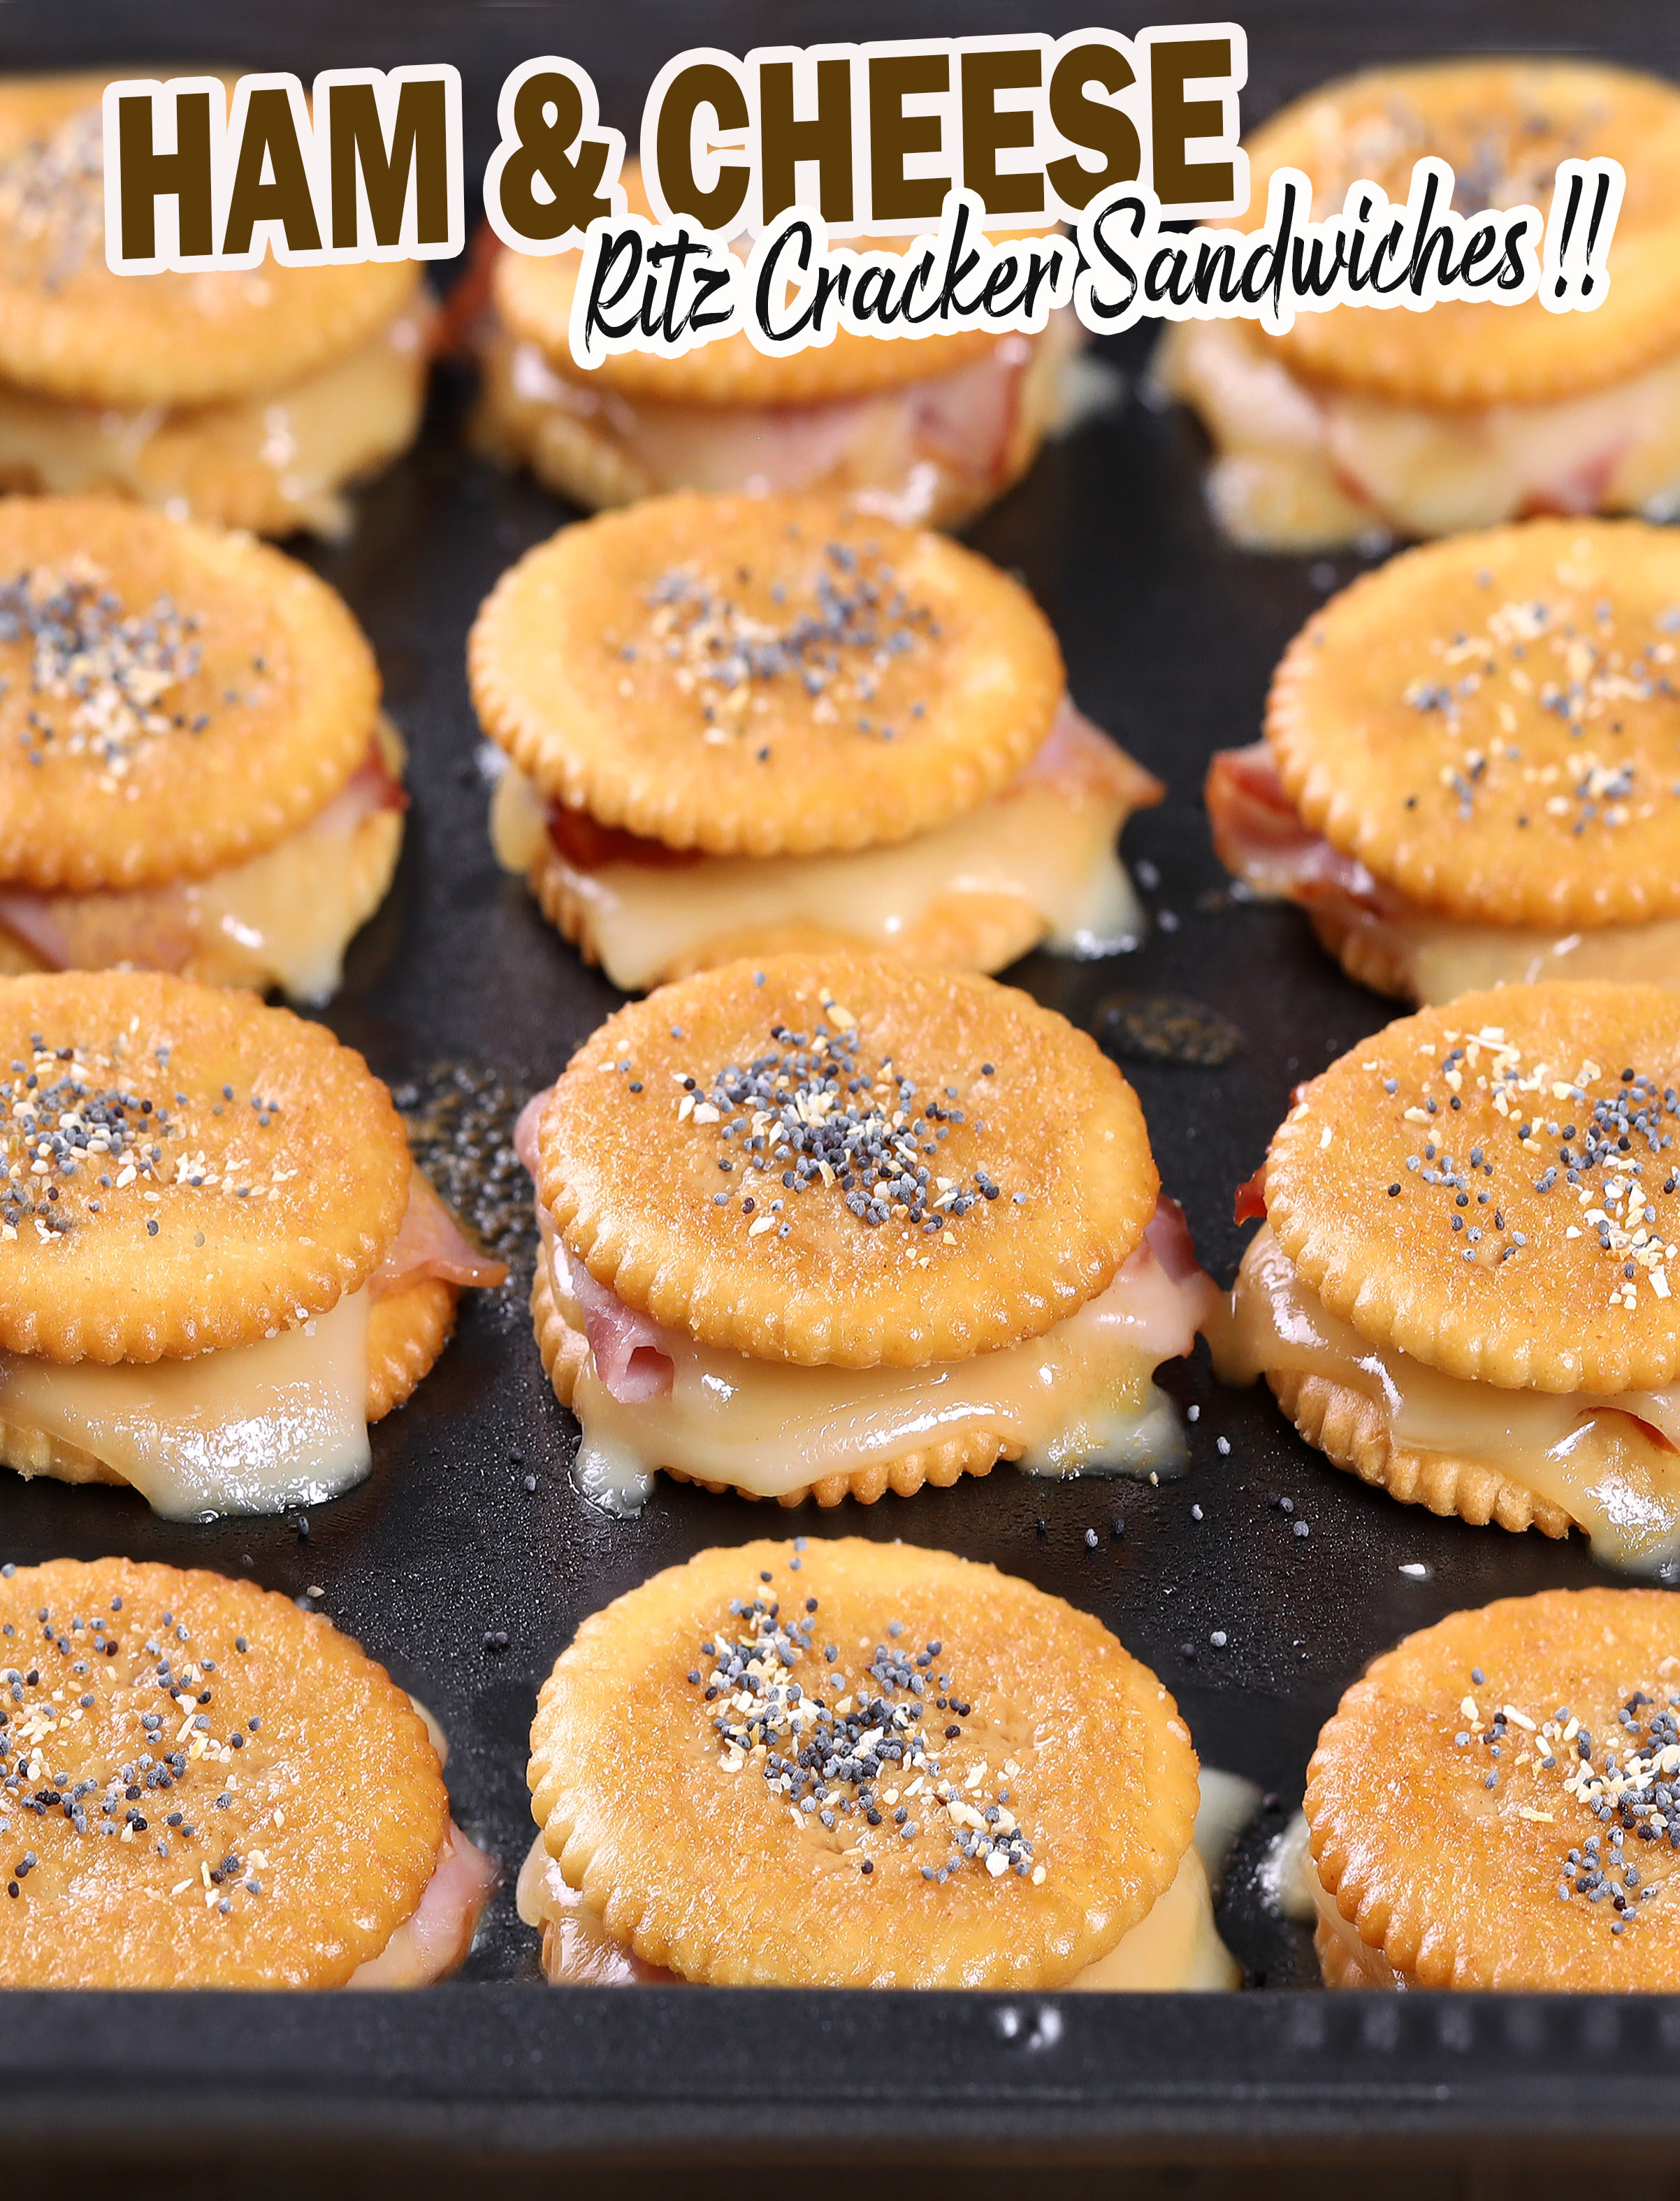 Ham and Cheese Ritz Cracker Sandwiches – fun little treats to serve for Christmas appetizers or game day snacking. Always a crowd favorite with layers of black forest Ham and Swiss cheese sandwiched in buttery crackers then topped with a sensational dijon glaze!